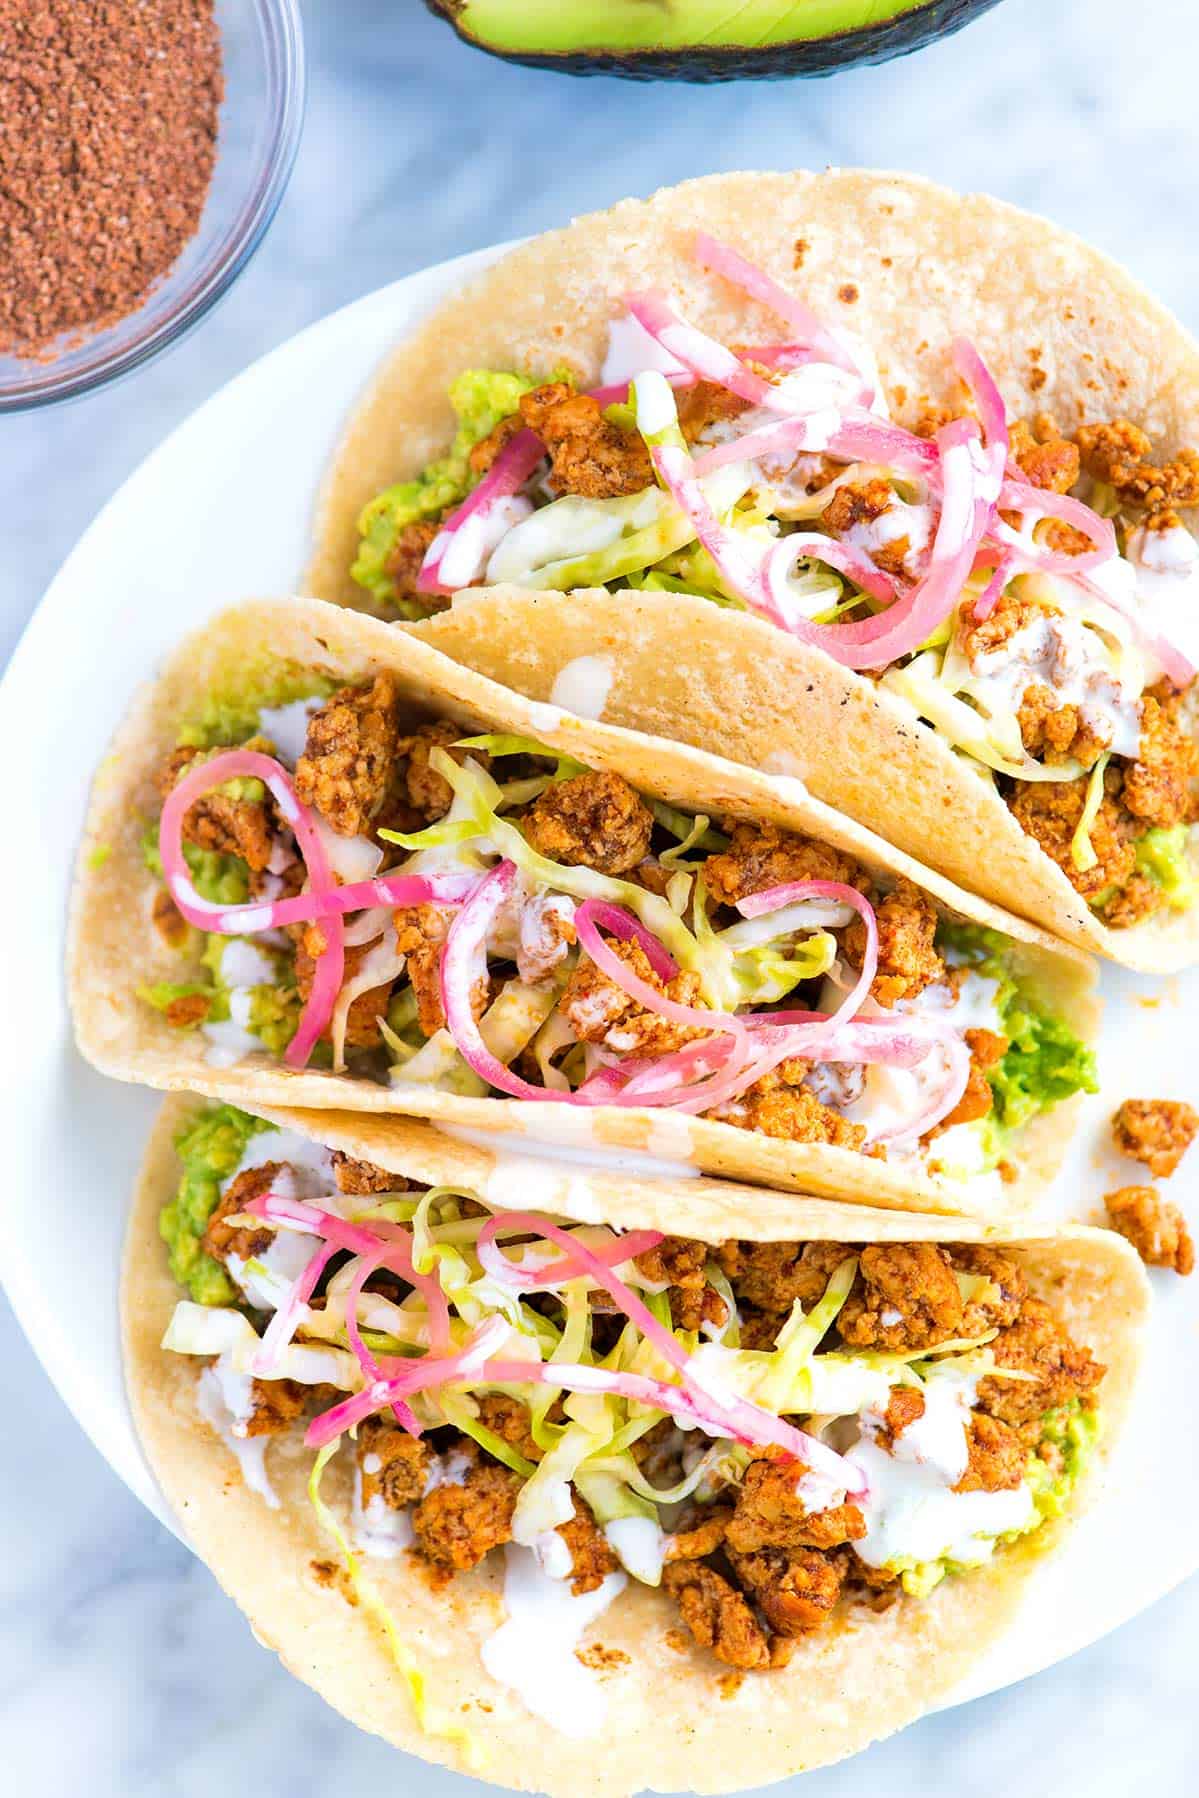 Tacos made with ground pork, avocado, and pickled onions